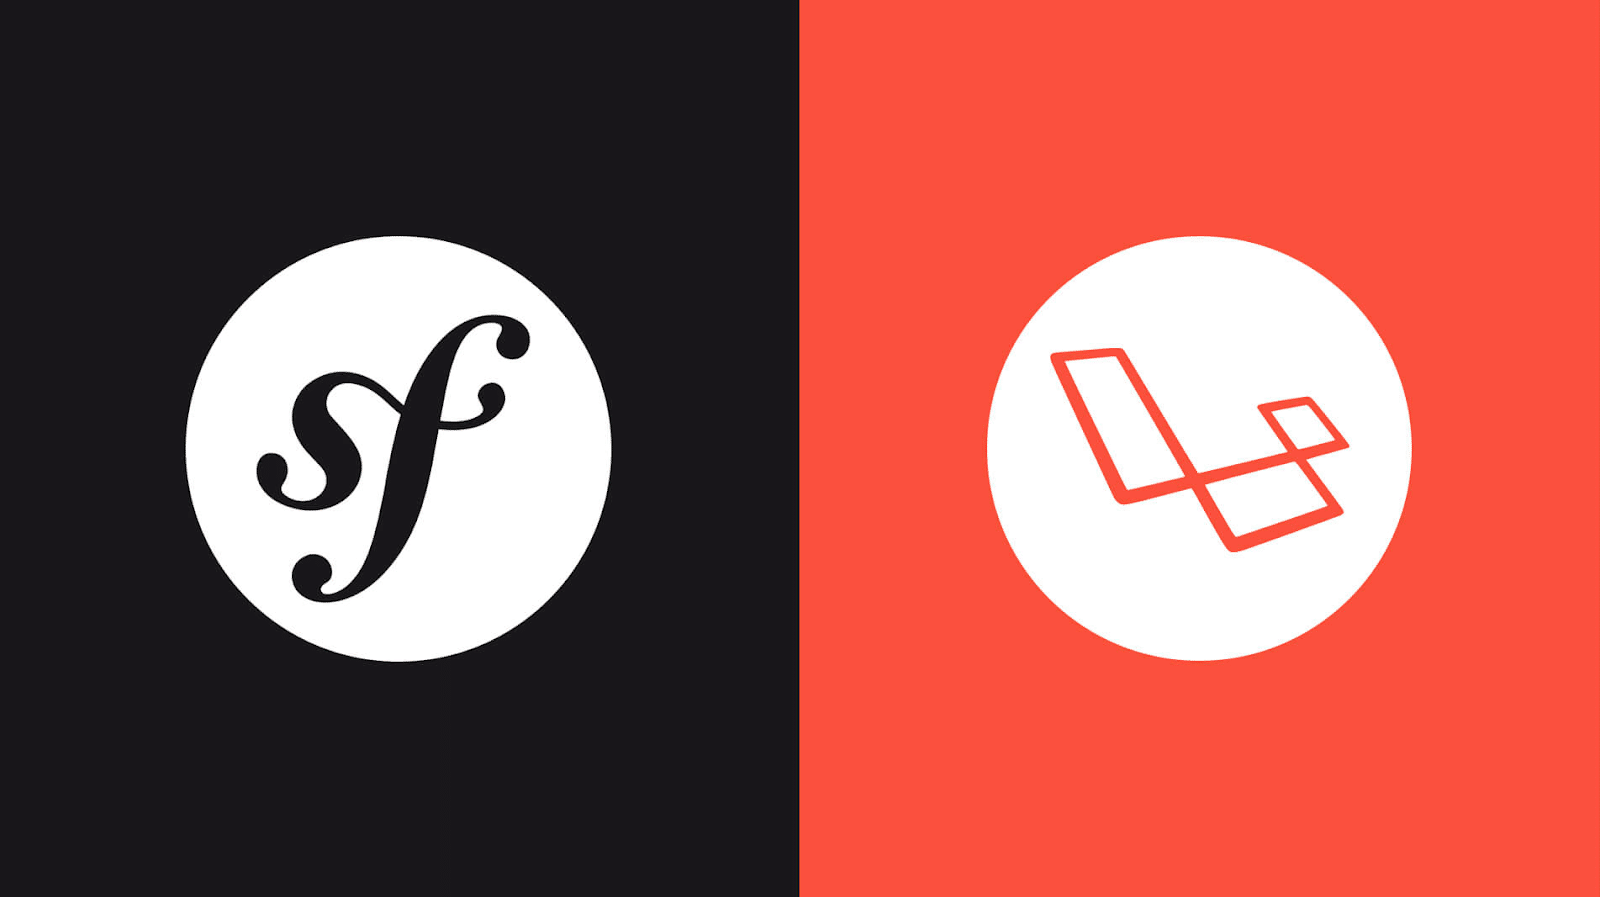 The Symfony logo with the initials "sf" in white atop a black circle to the left with the black background and the Laravel logo on a red background to the right.